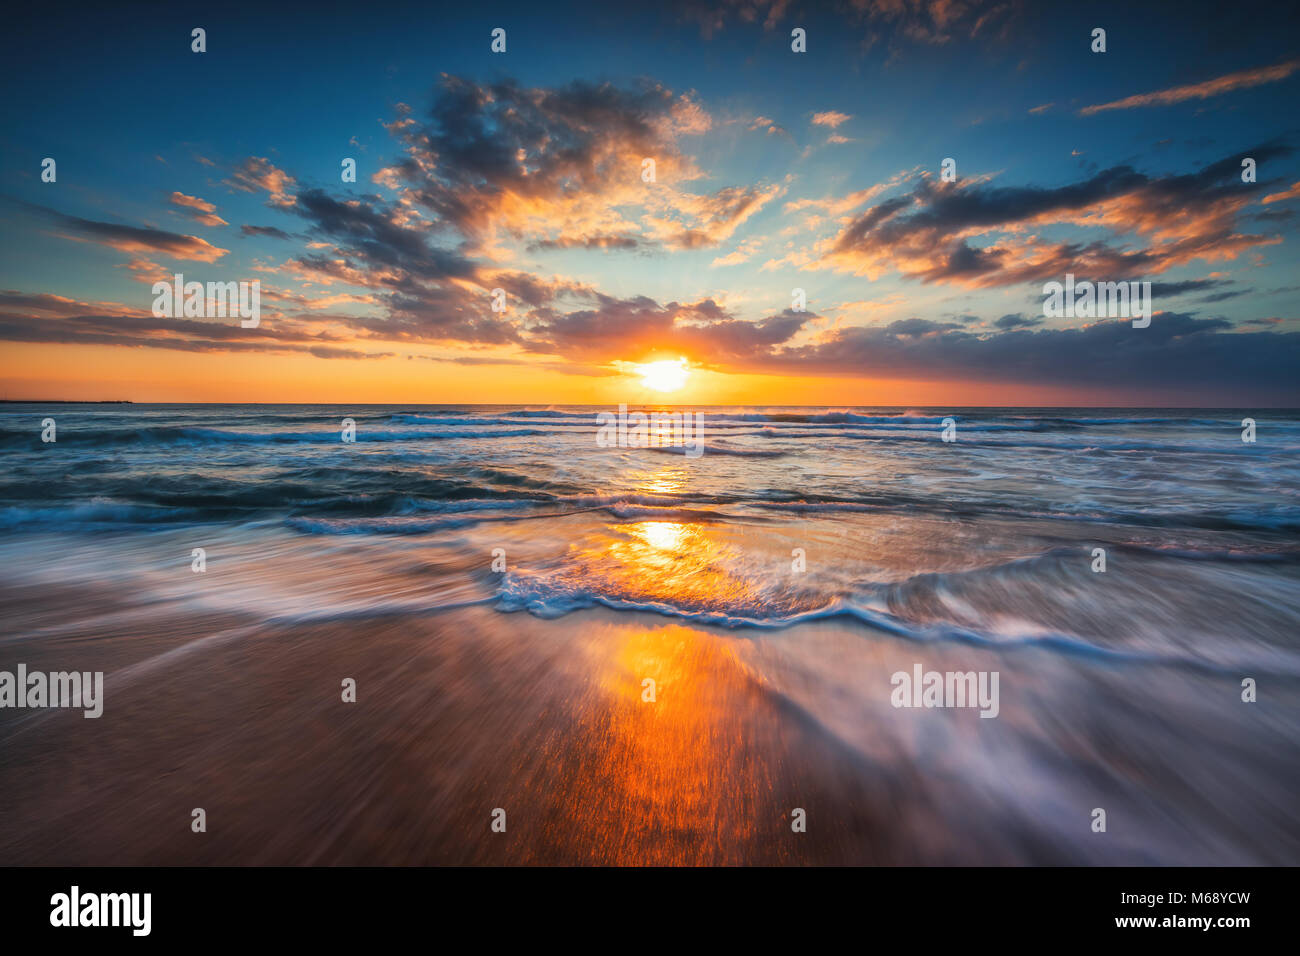 Beautiful Sunset And Sunrise Wallpapers High Resolution Stock Photography And Images Alamy